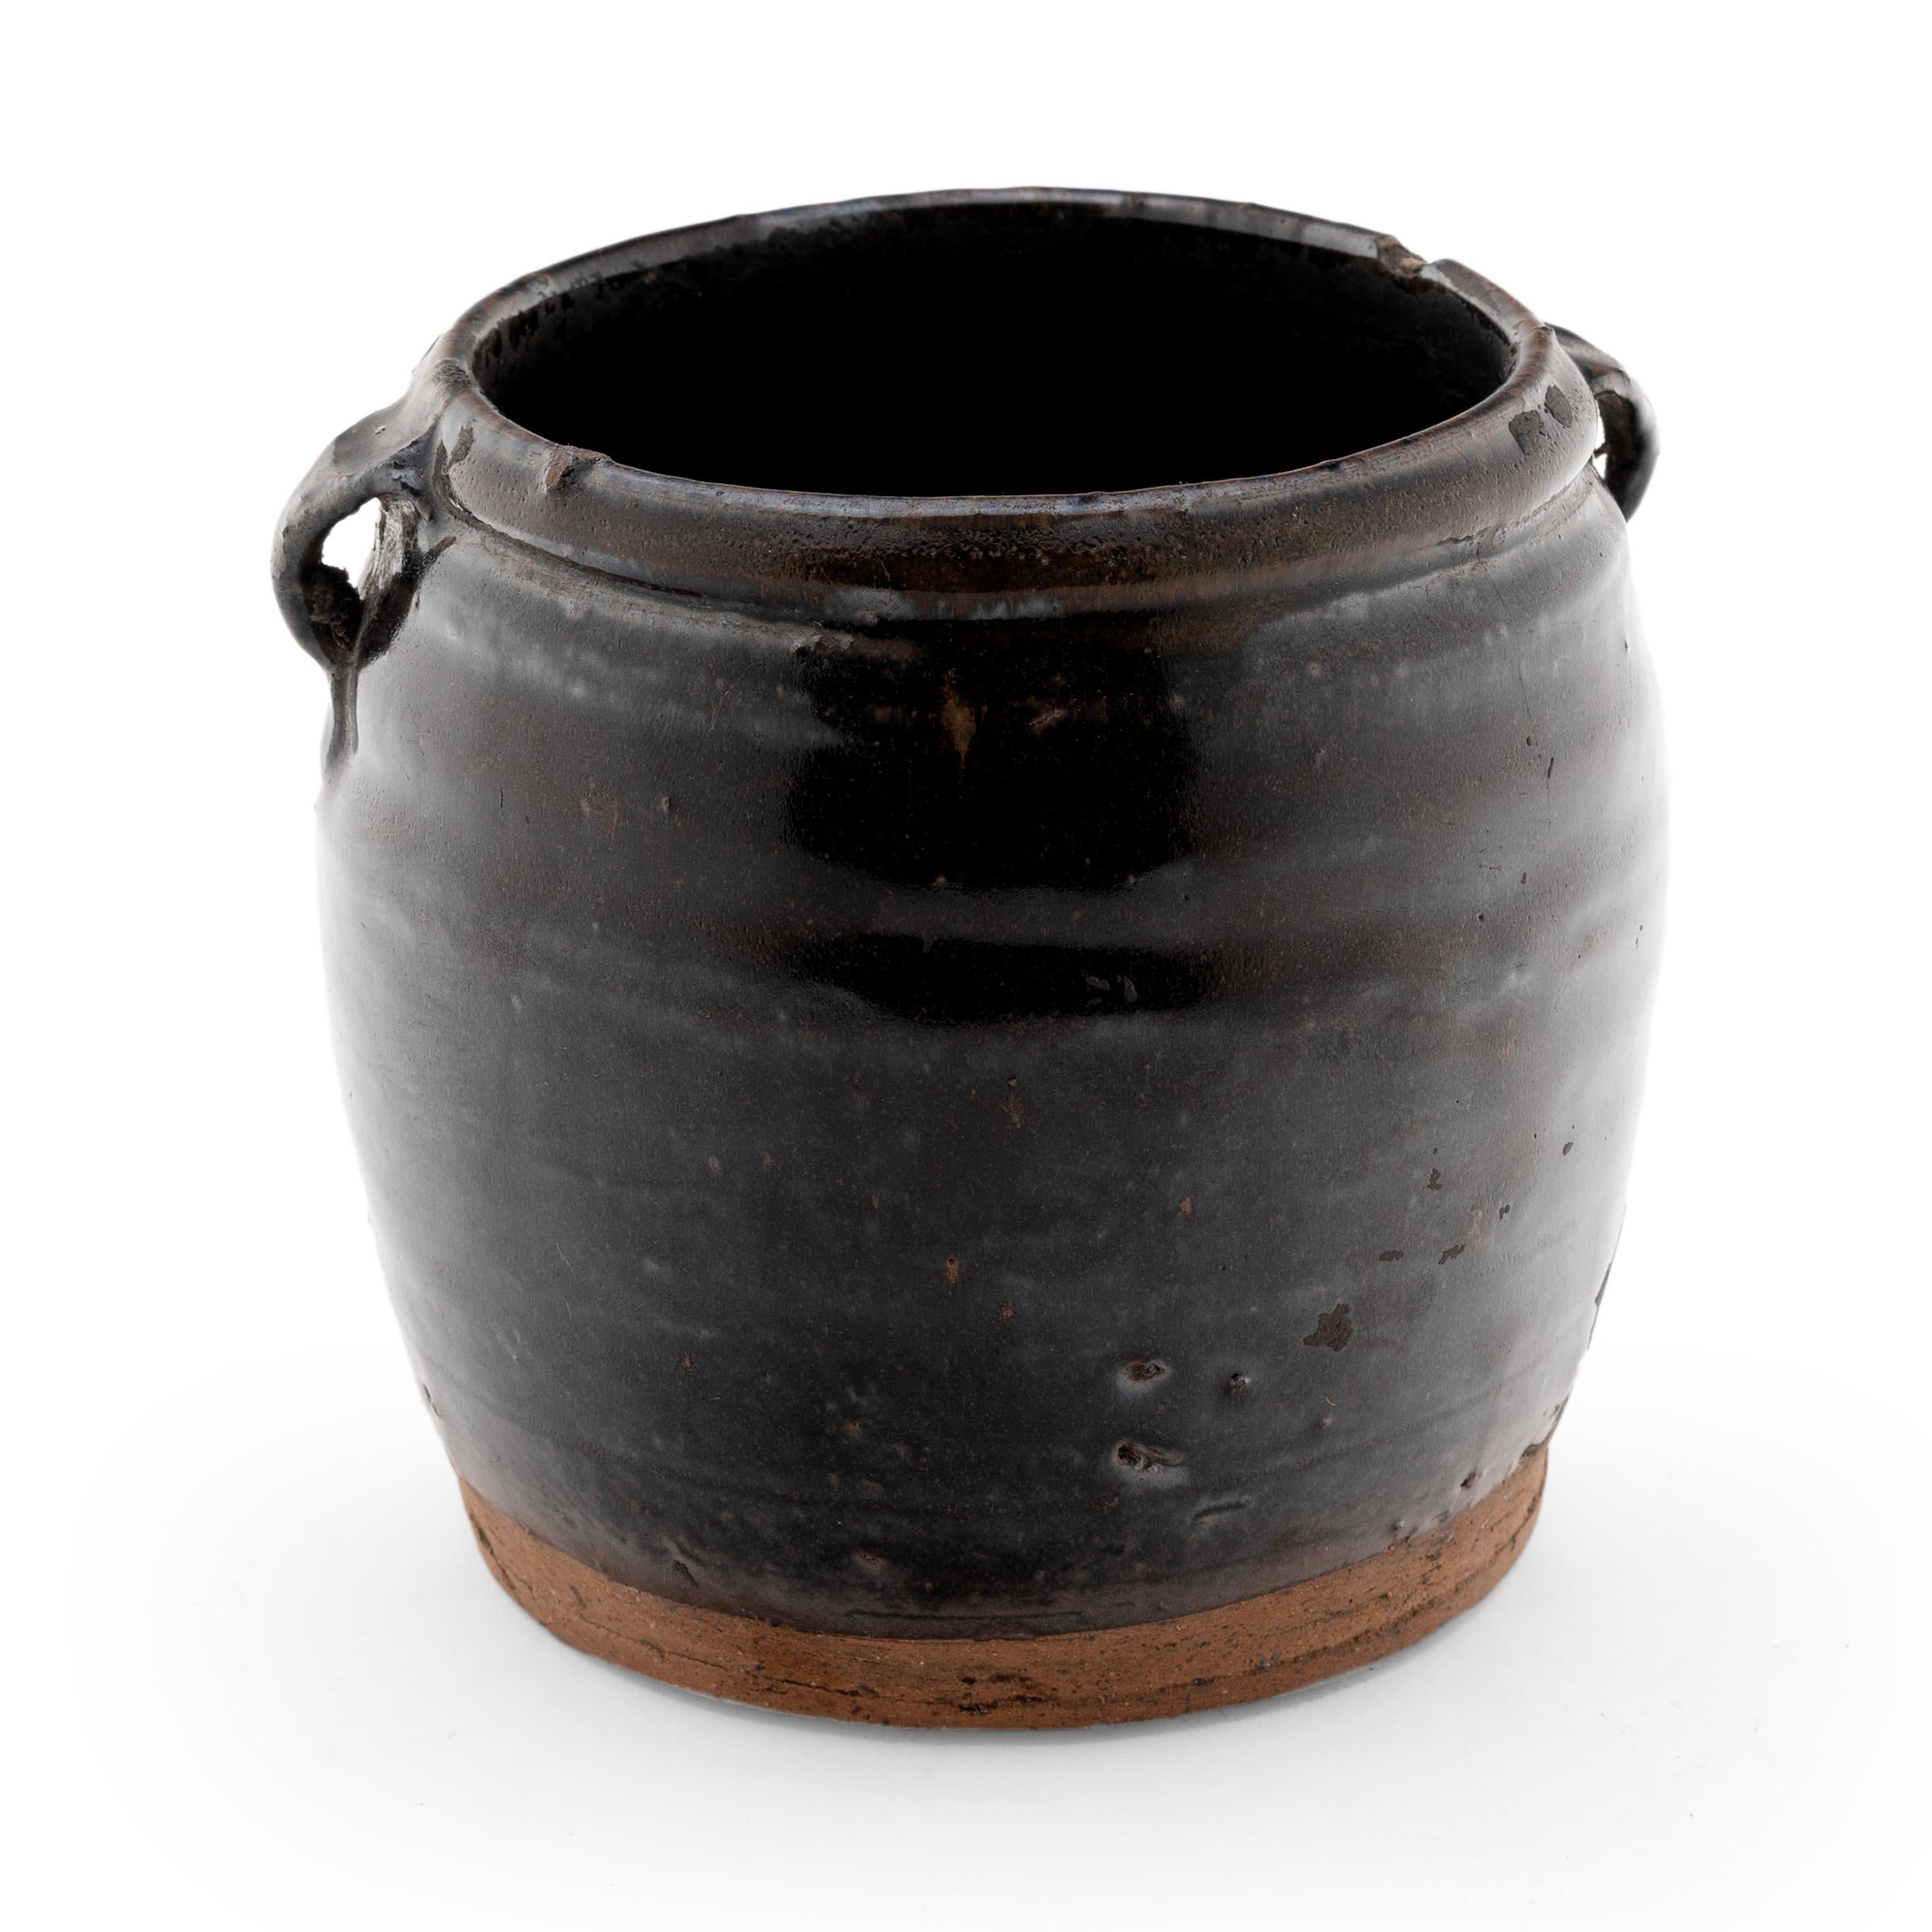 A thick brown glaze coats the stout body of this early 20th century terra cotta kitchen jar. As evidenced by the glazed interior, this wide-mouth jar was once used daily in a Provincial Chinese kitchen for fermenting foods and condiments. The